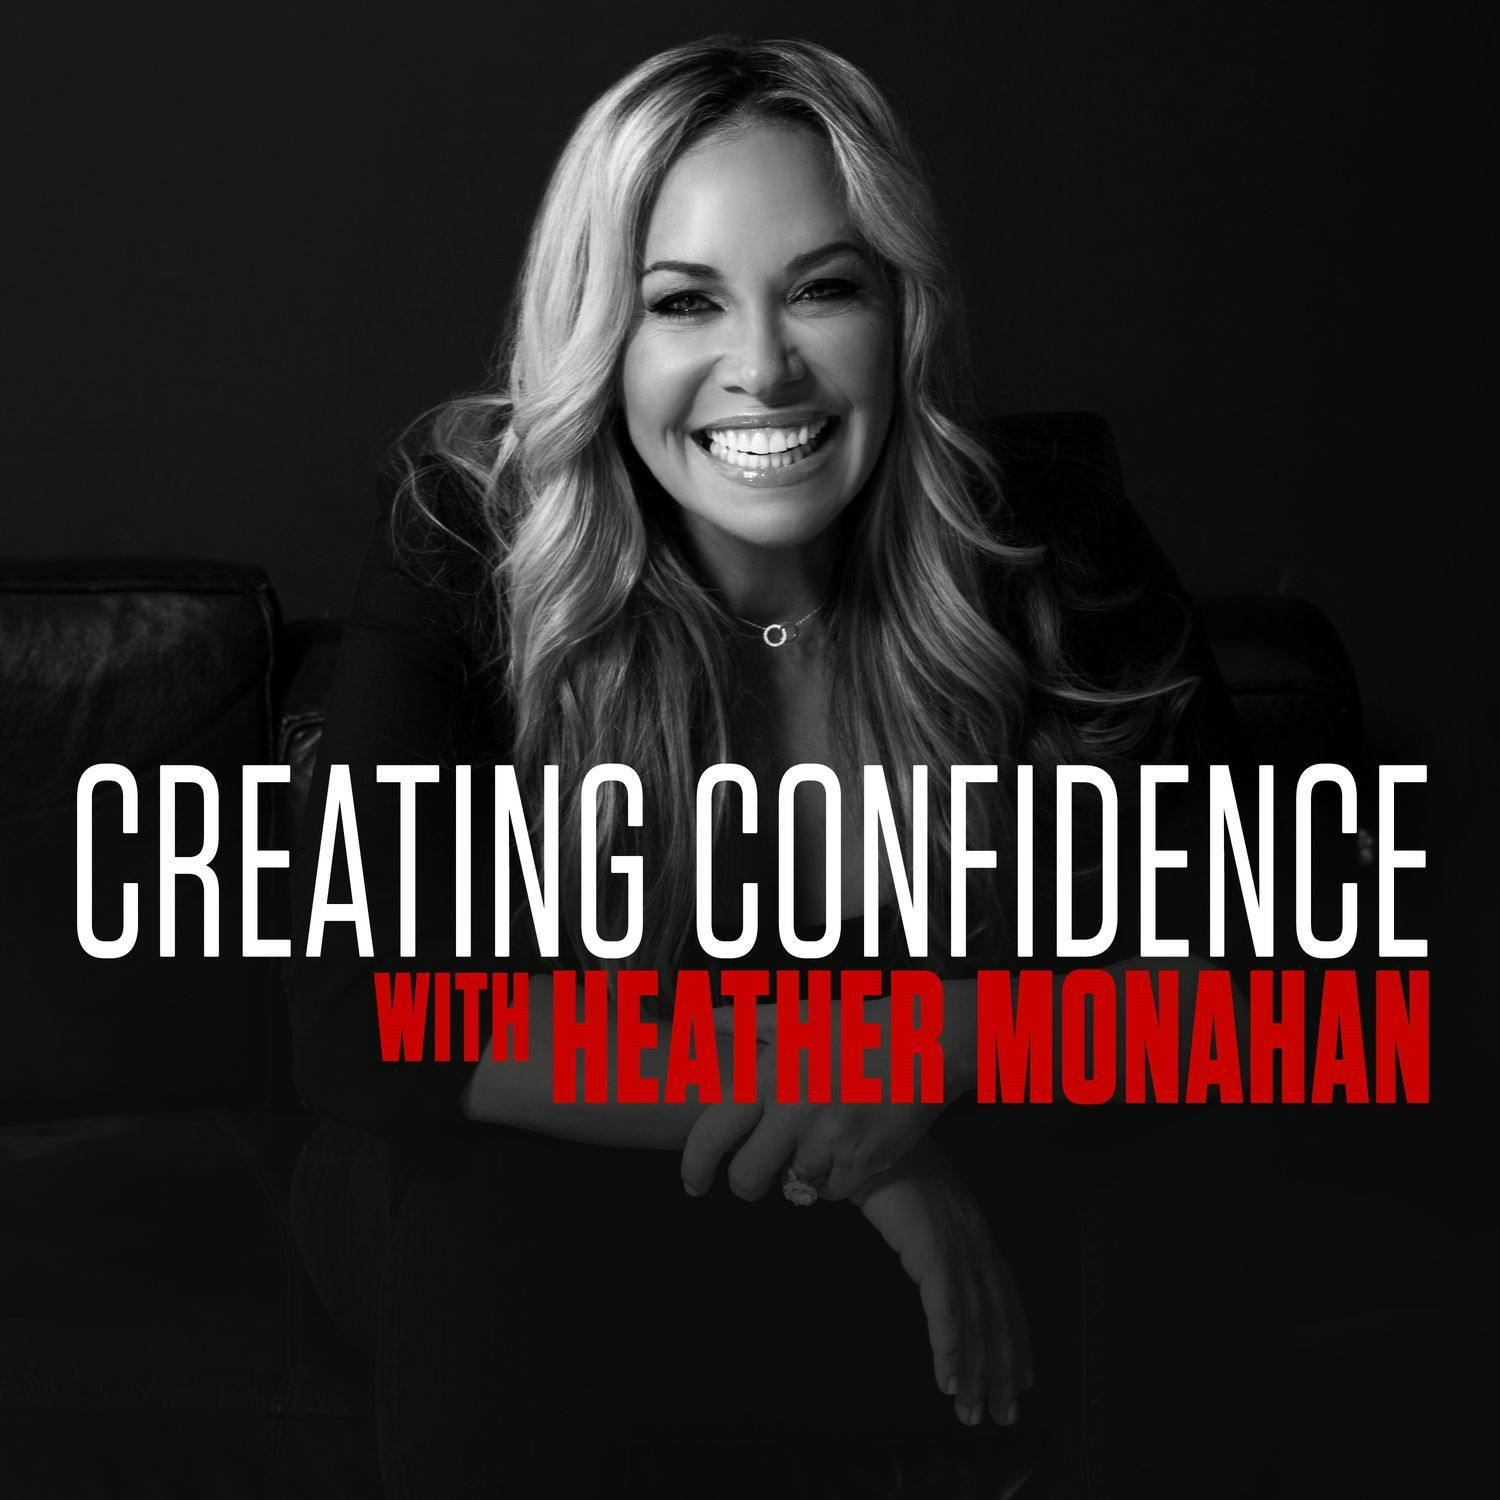 #180: Take On The Unexpected With Heather!  by Heather Monahan | YAP Media Network